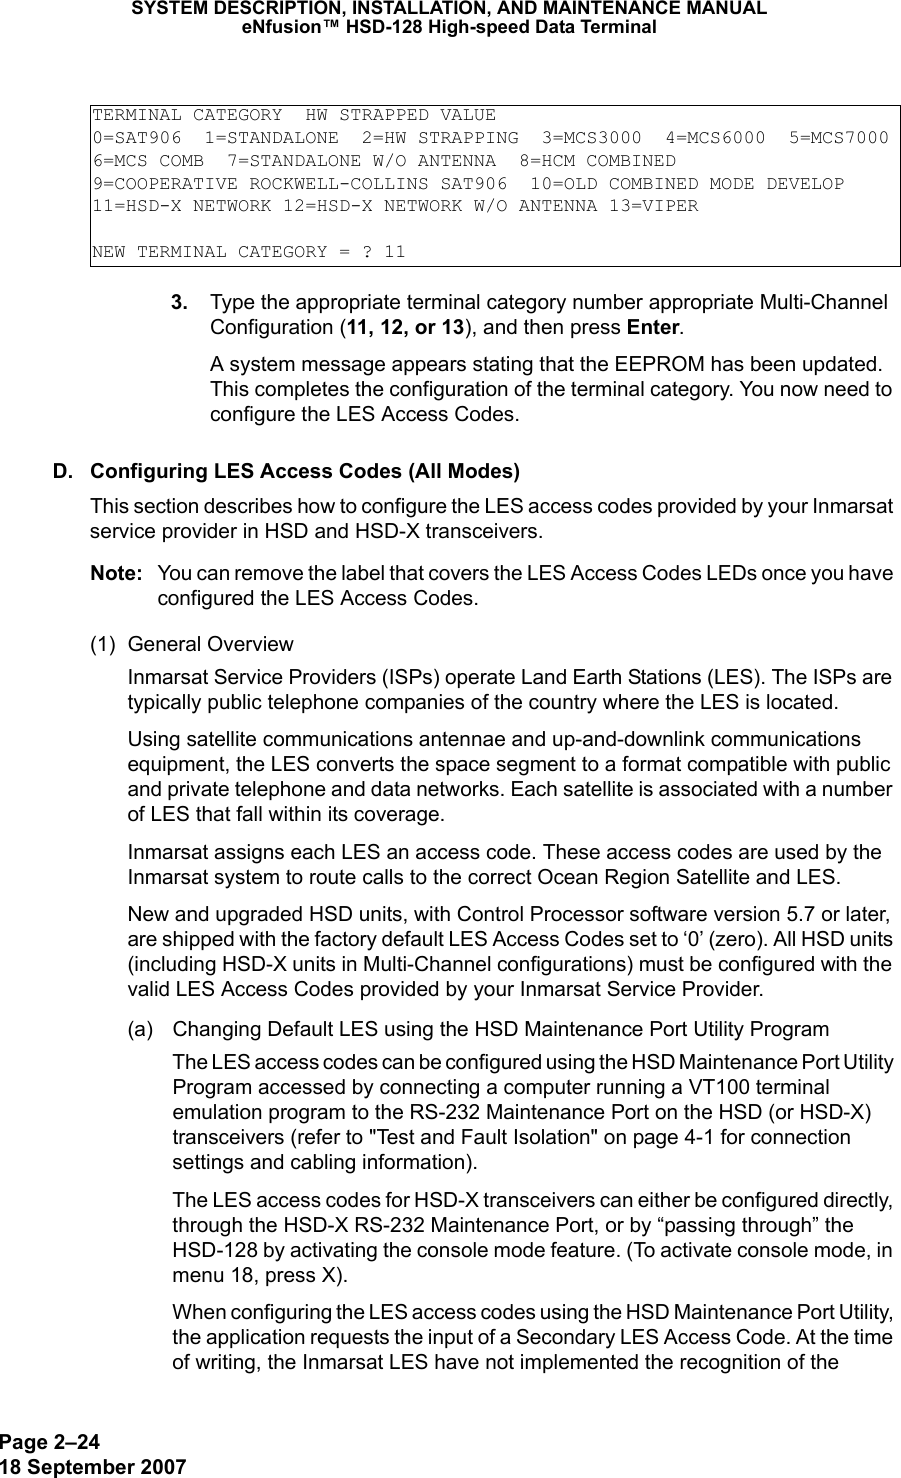 Page 2–2418 September 2007SYSTEM DESCRIPTION, INSTALLATION, AND MAINTENANCE MANUALeNfusion™ HSD-128 High-speed Data Terminal 3. Type the appropriate terminal category number appropriate Multi-Channel Configuration (11, 12, or 13), and then press Enter.A system message appears stating that the EEPROM has been updated. This completes the configuration of the terminal category. You now need to configure the LES Access Codes.D. Configuring LES Access Codes (All Modes)This section describes how to configure the LES access codes provided by your Inmarsat service provider in HSD and HSD-X transceivers.Note: You can remove the label that covers the LES Access Codes LEDs once you have configured the LES Access Codes.(1) General Overview Inmarsat Service Providers (ISPs) operate Land Earth Stations (LES). The ISPs are typically public telephone companies of the country where the LES is located.Using satellite communications antennae and up-and-downlink communications equipment, the LES converts the space segment to a format compatible with public and private telephone and data networks. Each satellite is associated with a number of LES that fall within its coverage.Inmarsat assigns each LES an access code. These access codes are used by the Inmarsat system to route calls to the correct Ocean Region Satellite and LES. New and upgraded HSD units, with Control Processor software version 5.7 or later, are shipped with the factory default LES Access Codes set to ‘0’ (zero). All HSD units (including HSD-X units in Multi-Channel configurations) must be configured with the valid LES Access Codes provided by your Inmarsat Service Provider. (a) Changing Default LES using the HSD Maintenance Port Utility ProgramThe LES access codes can be configured using the HSD Maintenance Port Utility Program accessed by connecting a computer running a VT100 terminal emulation program to the RS-232 Maintenance Port on the HSD (or HSD-X) transceivers (refer to &quot;Test and Fault Isolation&quot; on page 4-1 for connection settings and cabling information). The LES access codes for HSD-X transceivers can either be configured directly, through the HSD-X RS-232 Maintenance Port, or by “passing through” the HSD-128 by activating the console mode feature. (To activate console mode, in menu 18, press X). When configuring the LES access codes using the HSD Maintenance Port Utility, the application requests the input of a Secondary LES Access Code. At the time of writing, the Inmarsat LES have not implemented the recognition of the TERMINAL CATEGORY  HW STRAPPED VALUE0=SAT906  1=STANDALONE  2=HW STRAPPING  3=MCS3000  4=MCS6000  5=MCS70006=MCS COMB  7=STANDALONE W/O ANTENNA  8=HCM COMBINED9=COOPERATIVE ROCKWELL-COLLINS SAT906  10=OLD COMBINED MODE DEVELOP11=HSD-X NETWORK 12=HSD-X NETWORK W/O ANTENNA 13=VIPERNEW TERMINAL CATEGORY = ? 11